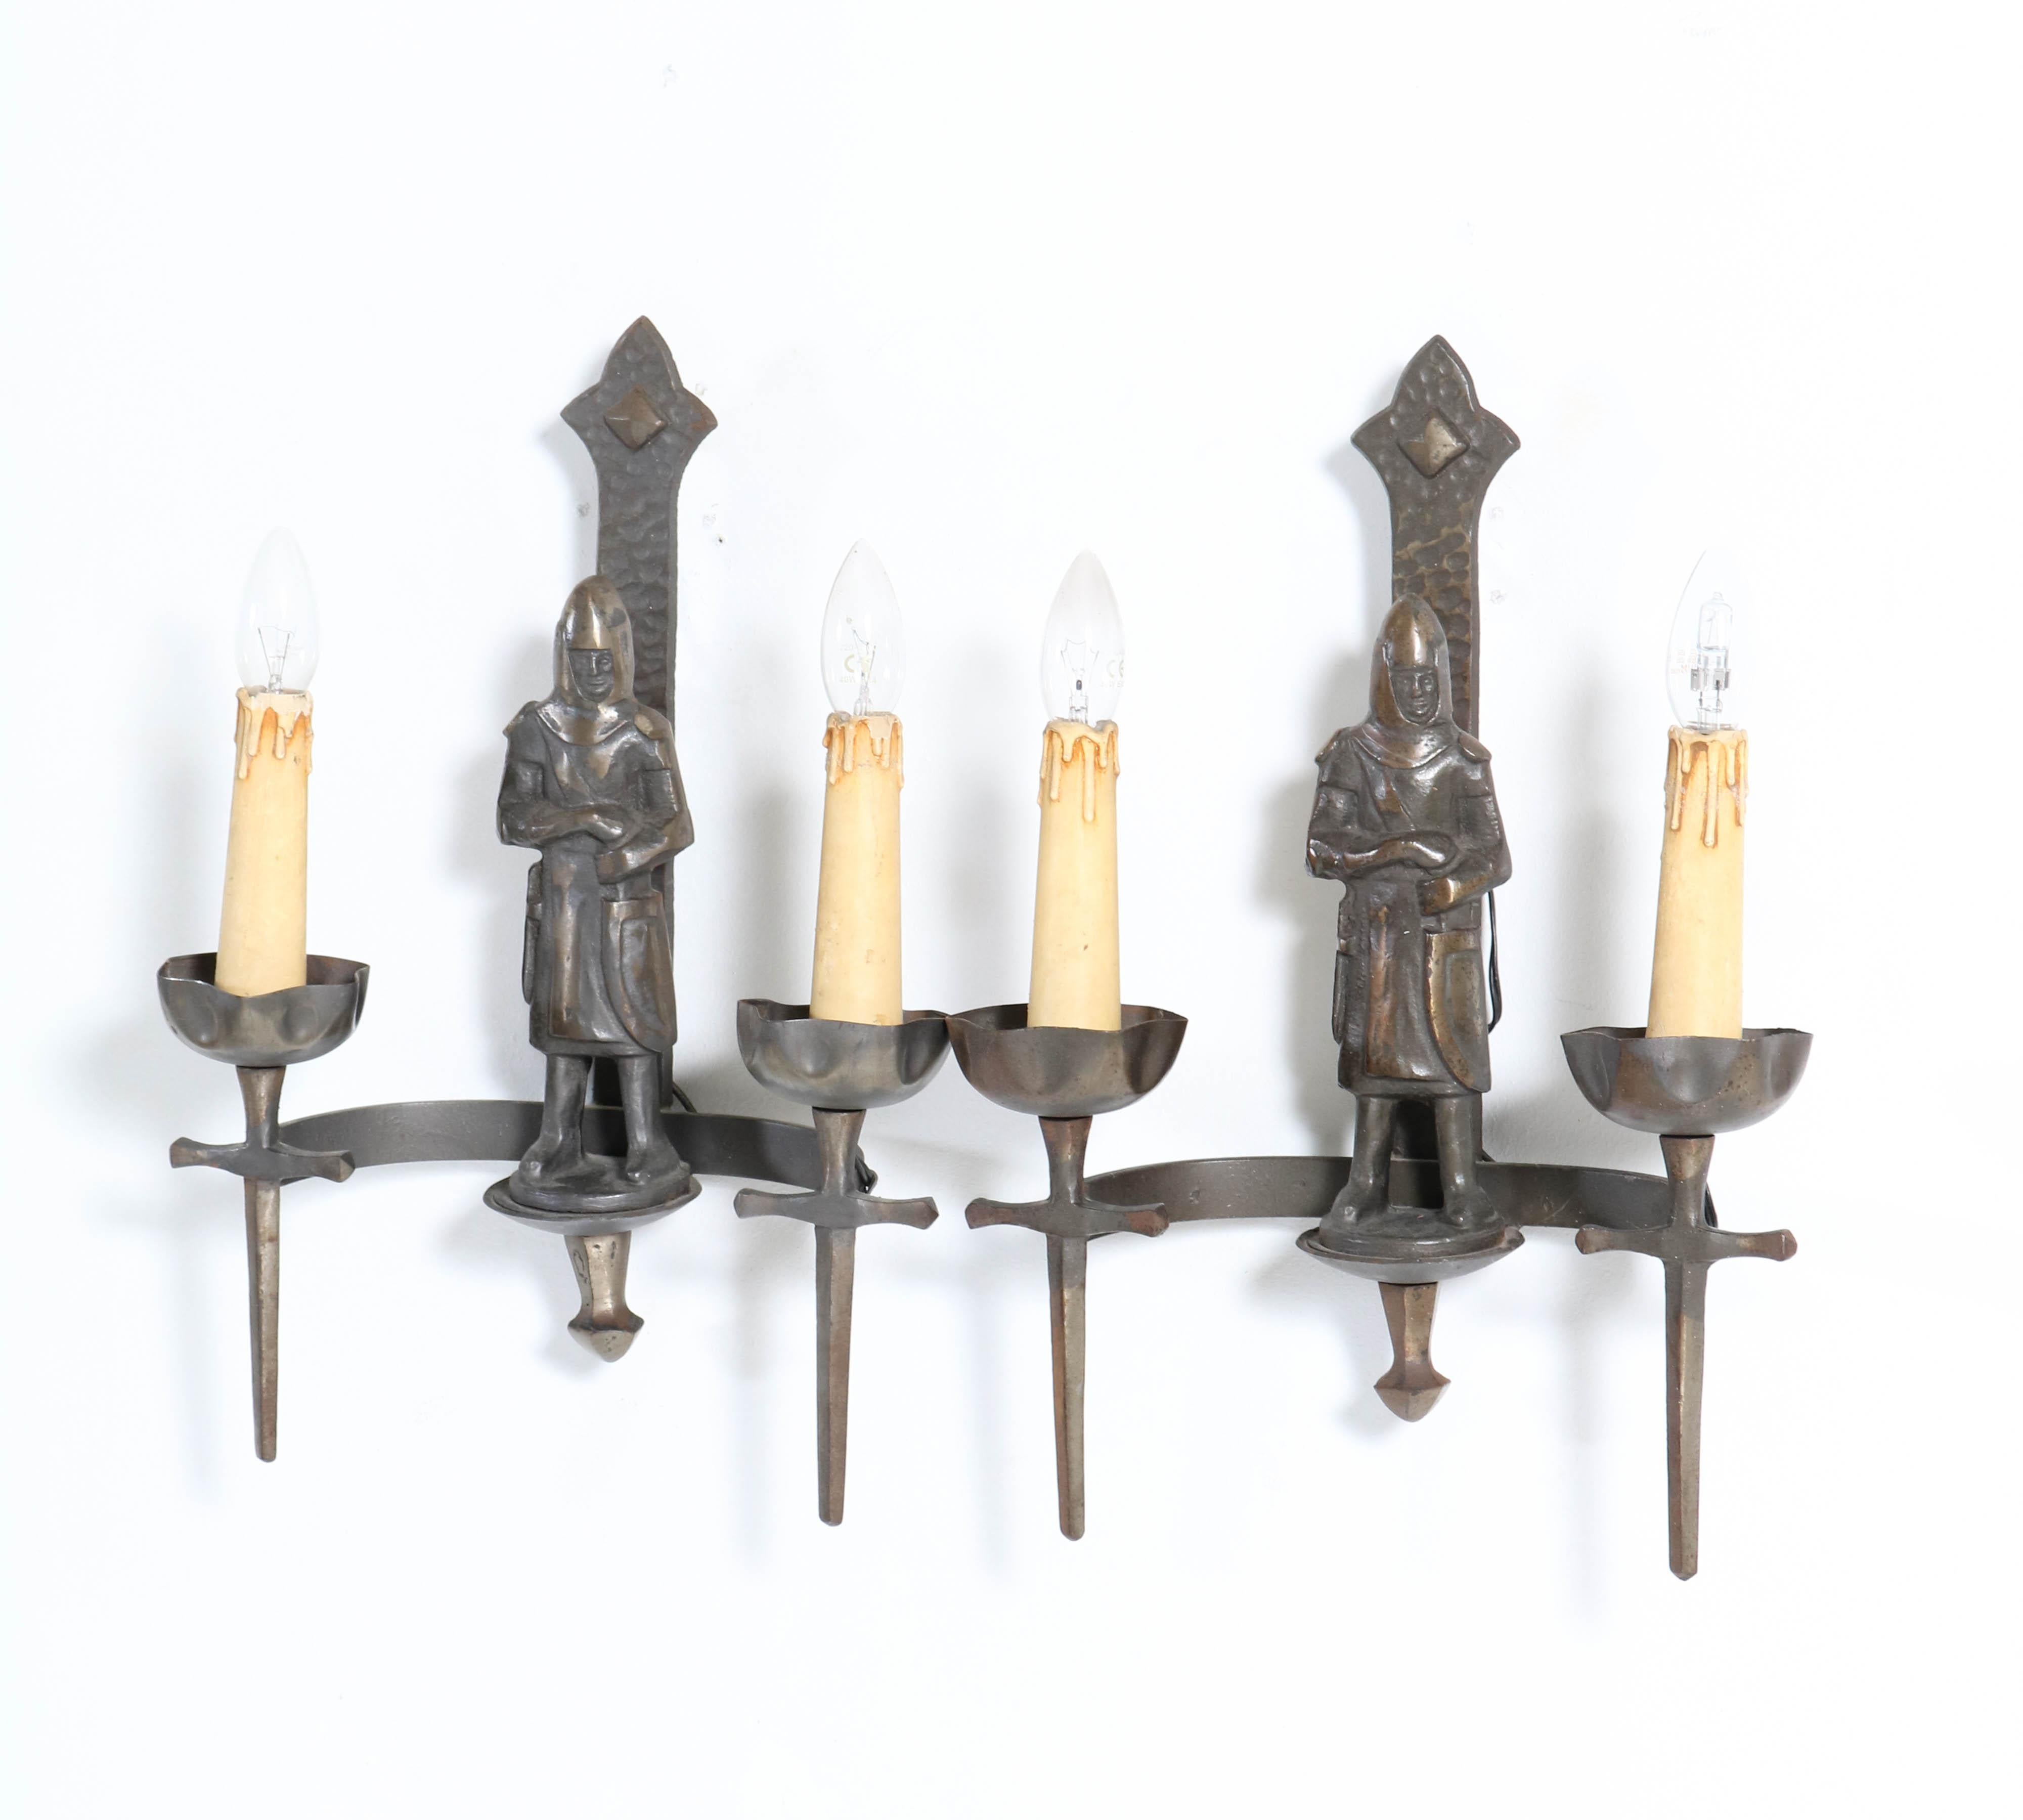 French Gothic Revival Bronzed Knights with Swords Wall Lights or Sconses 5